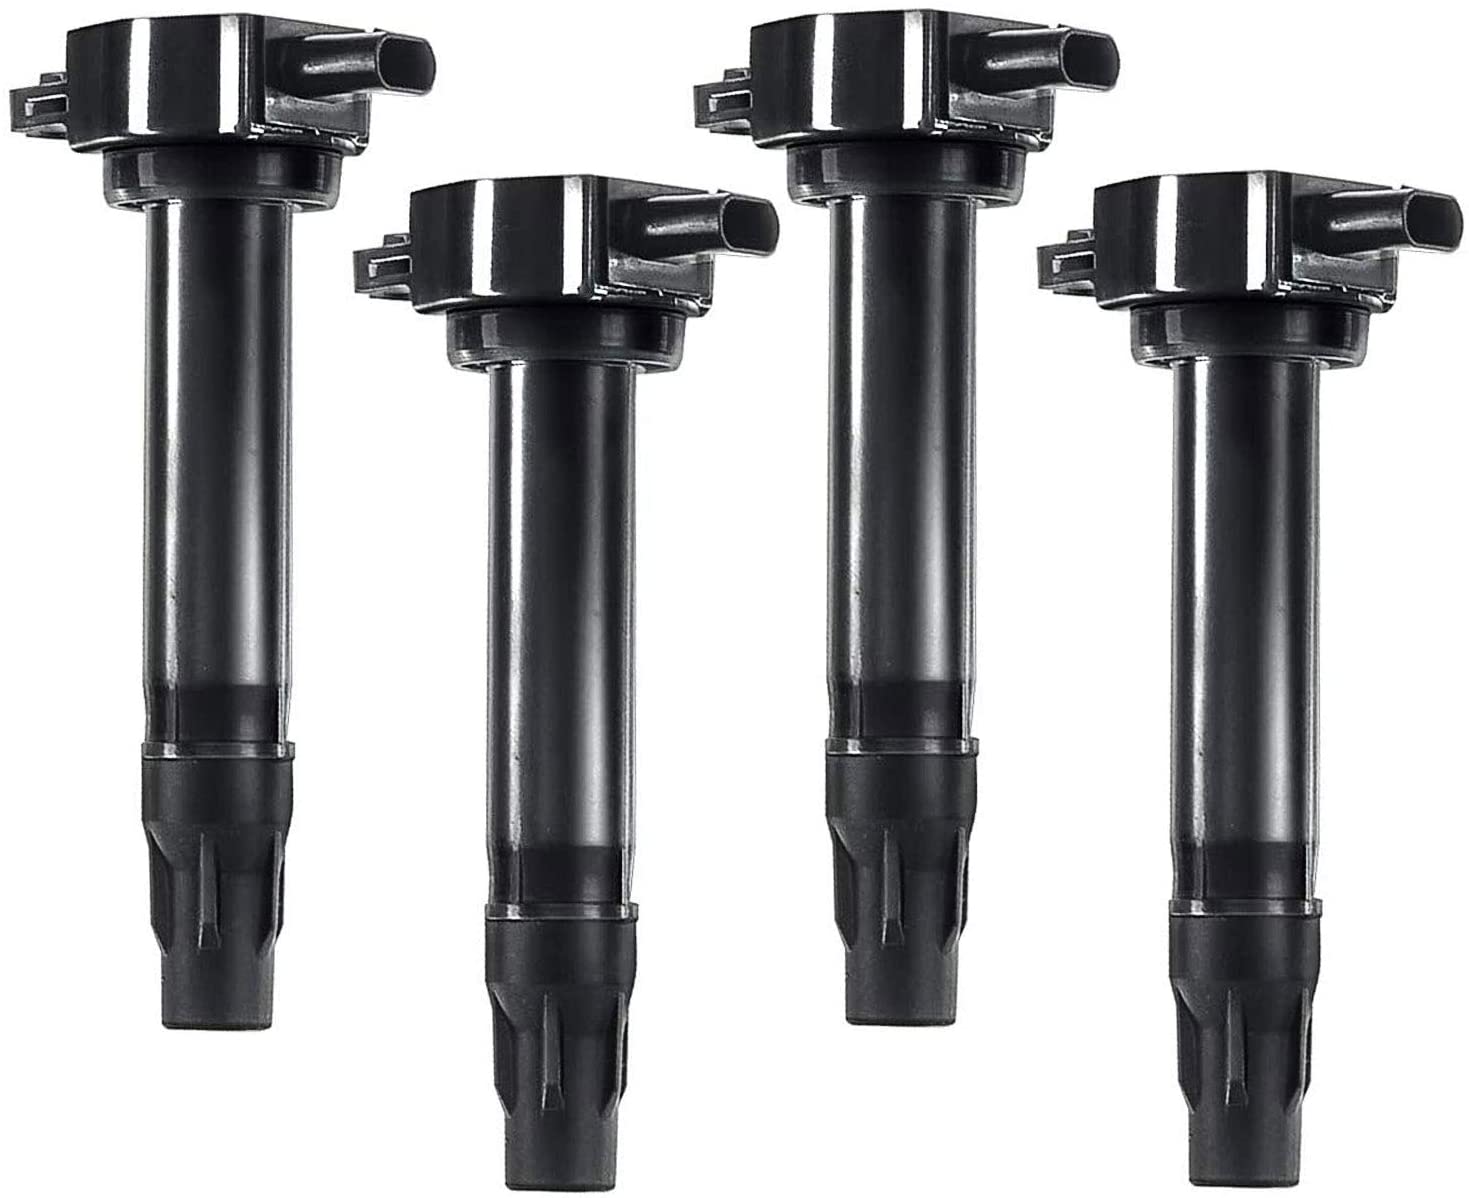 A-Premium Ignition Coil Pack Replacement for Dodge Journey 2009-2017 Caliber Avenger 200 Sebring Jeep Compass Patriot 4-PC Set (Pack of 4)